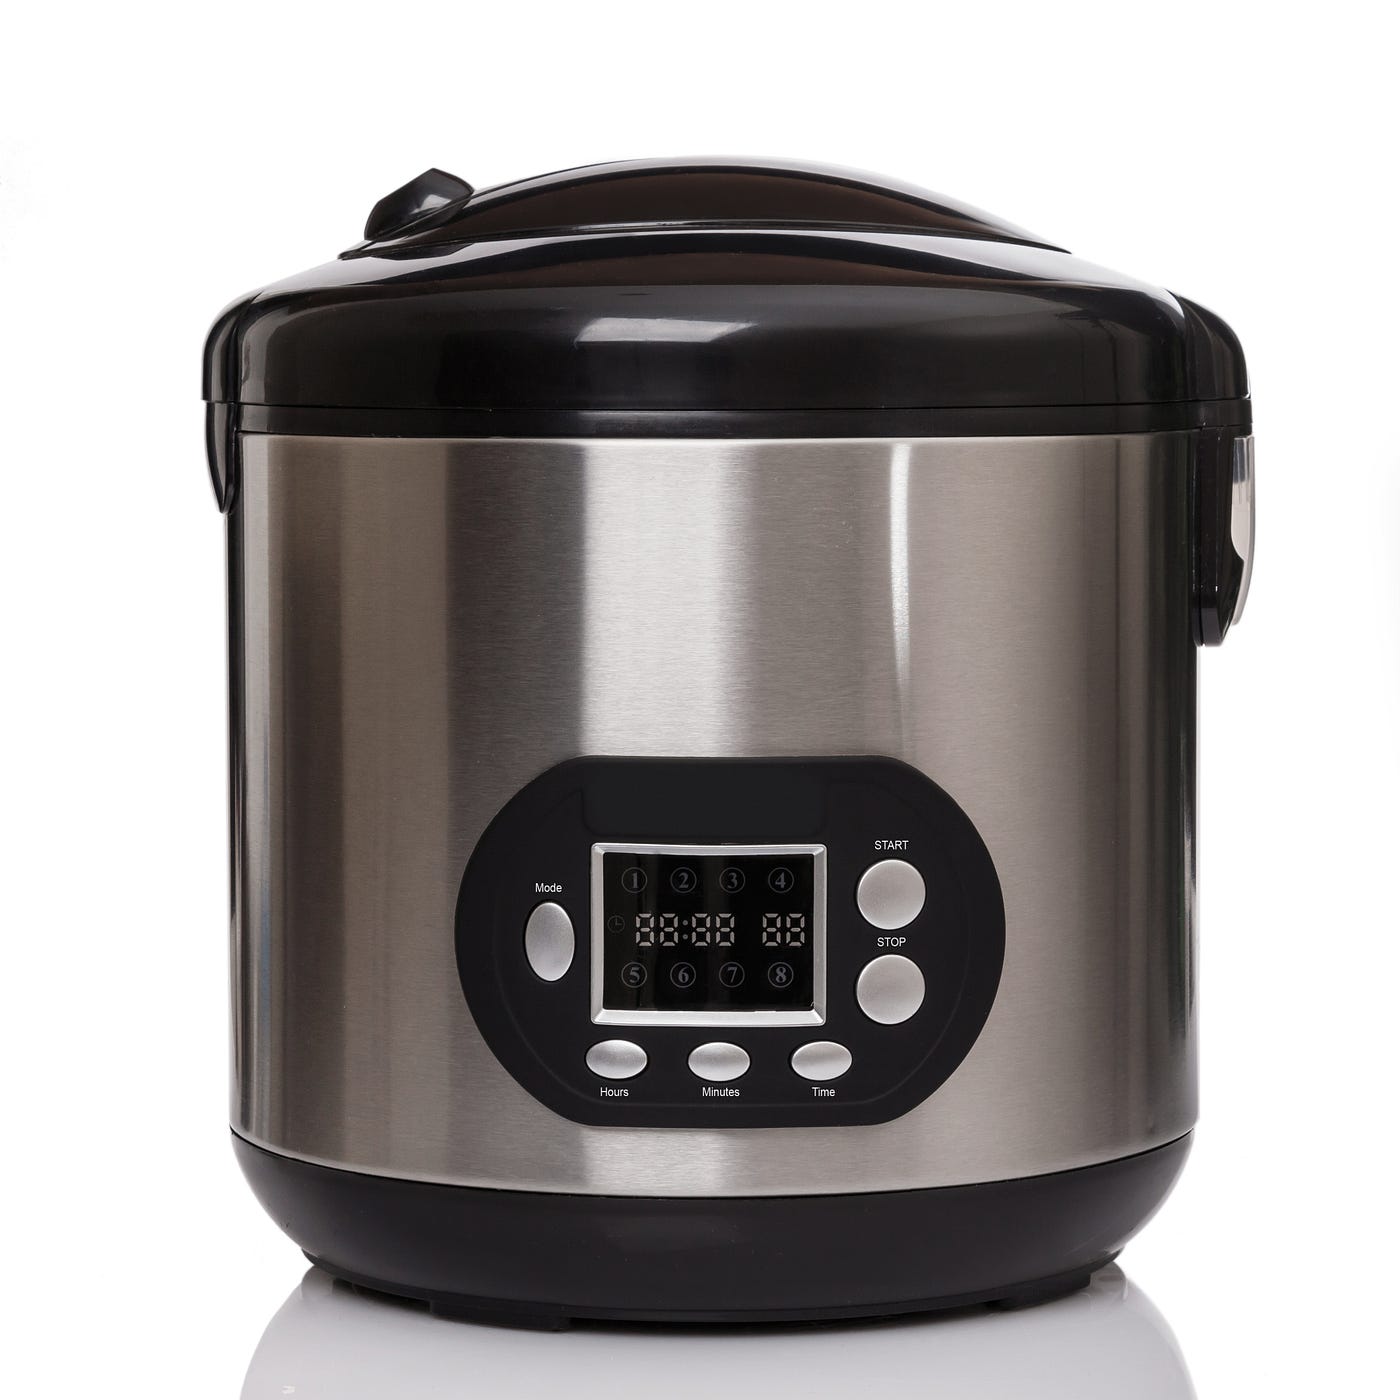 Health Benefits of Non-toxic Rice Cooker, by Mary Burrow